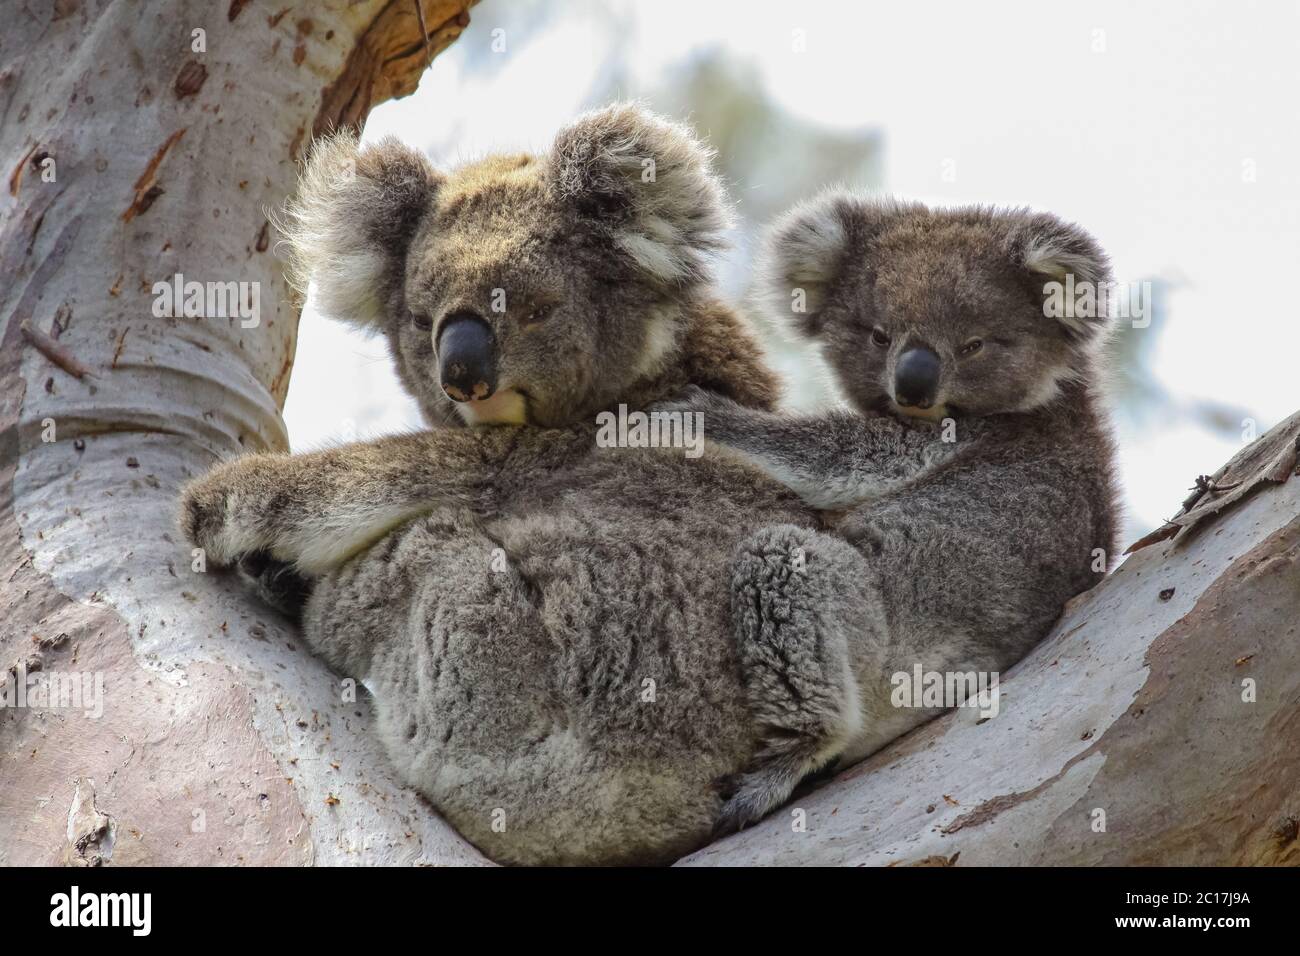 Koala mother with baby joey on its back sitting in a eucalyptus tree, facing, Great Otway National P Stock Photo